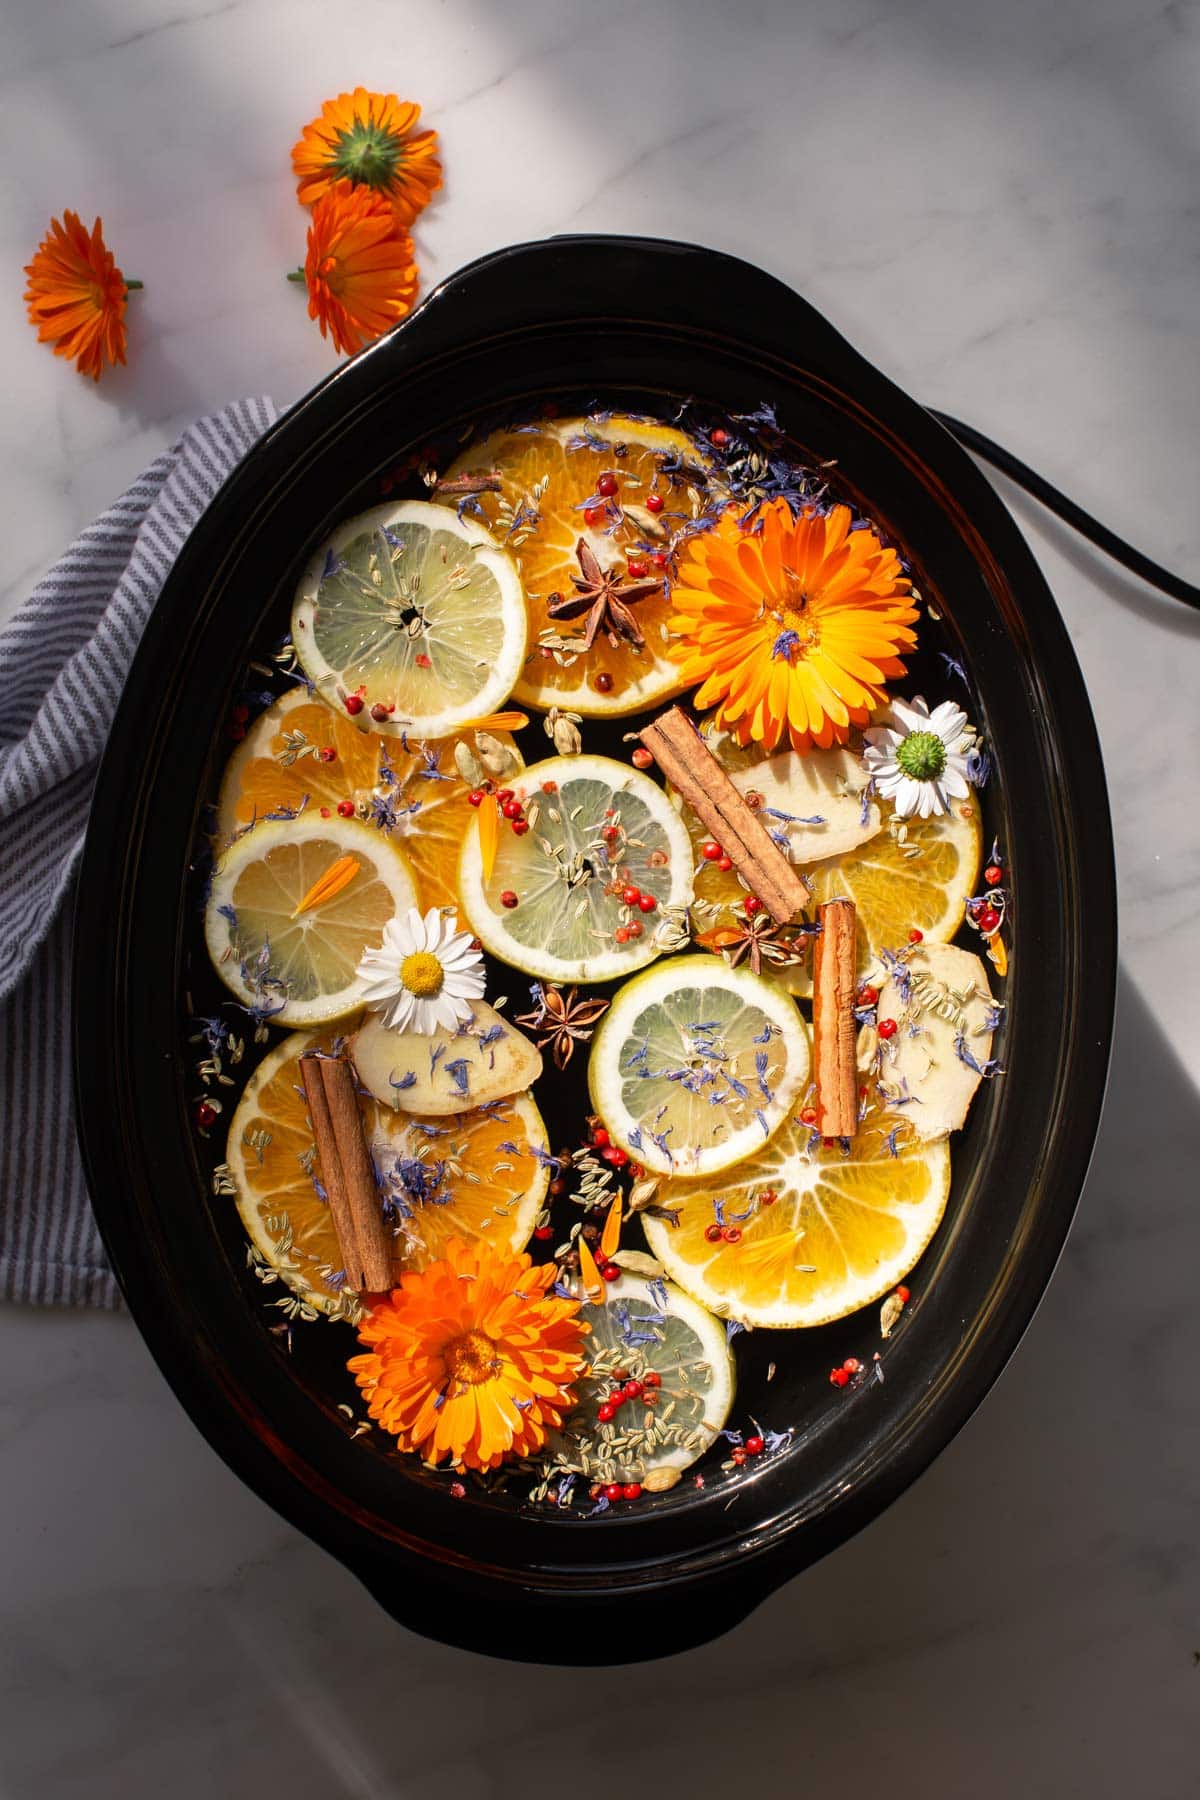 Hero shot of a crockpot on a marble counter, filled with the most vibrant colourful ingredients: sliced orange, grapefruit and limes, pink peppercorns, star anise, cinnamon sticks, orange calendula flowers, purple cornflowers and more. The lid is off, to allow the scent to fill the home.